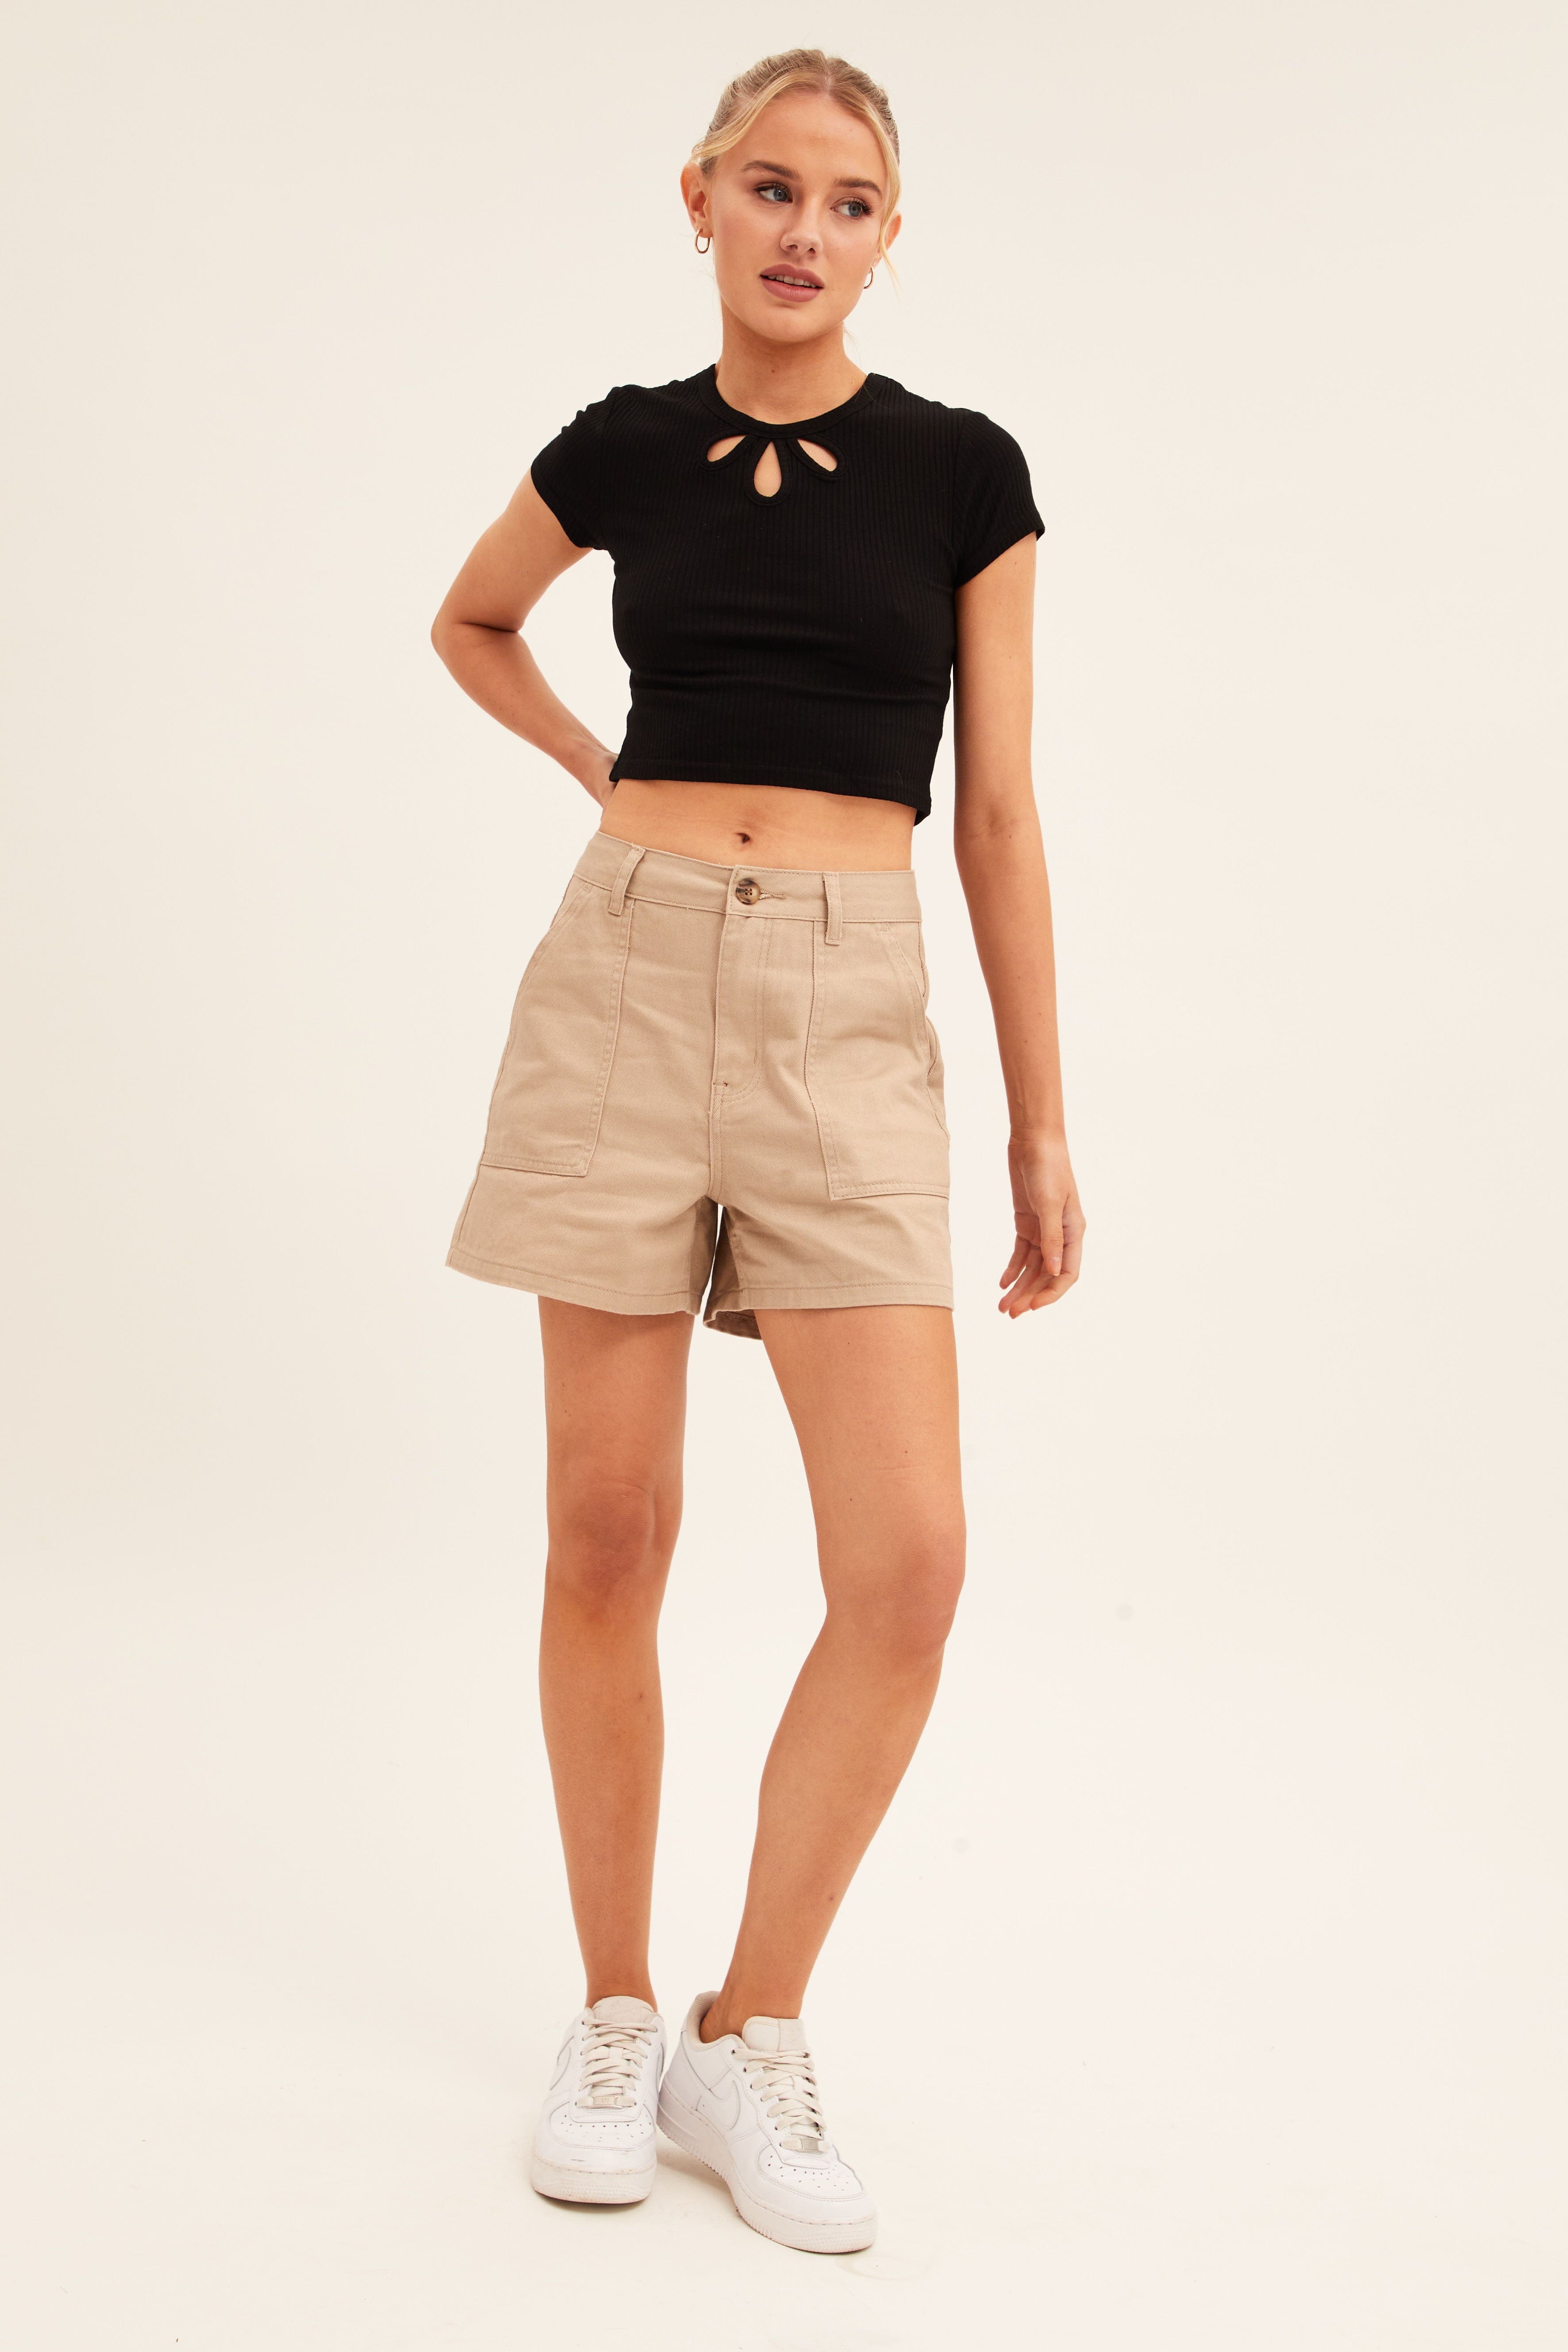 SHORTS Camel Cargo Short High Waist Cotton Twill for Women by Ally